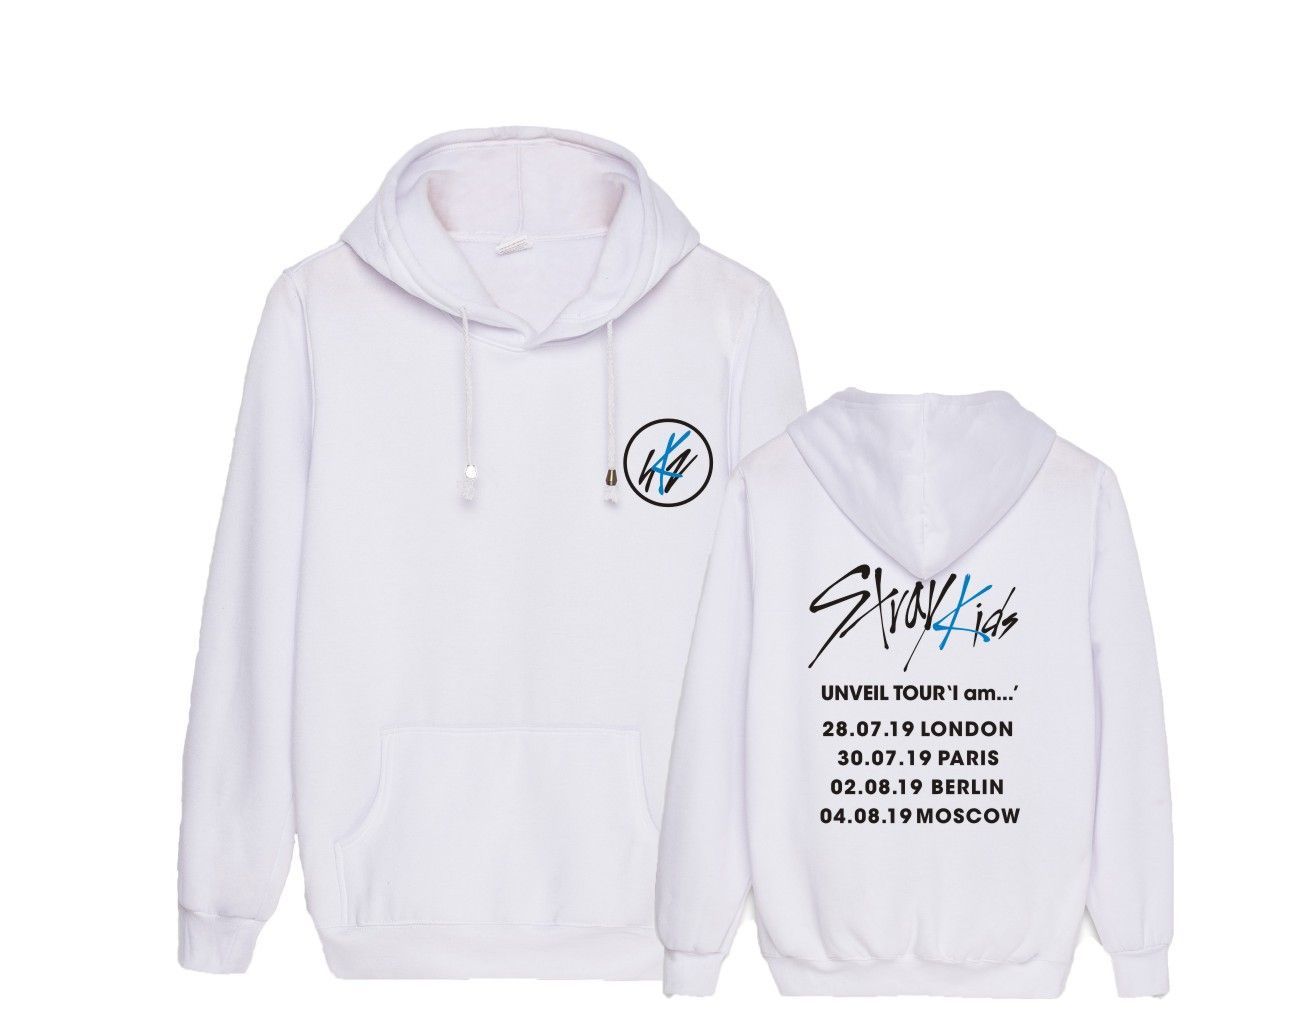 Stray Kids Unveil Tour Hoodie – TUNED IN, LLC